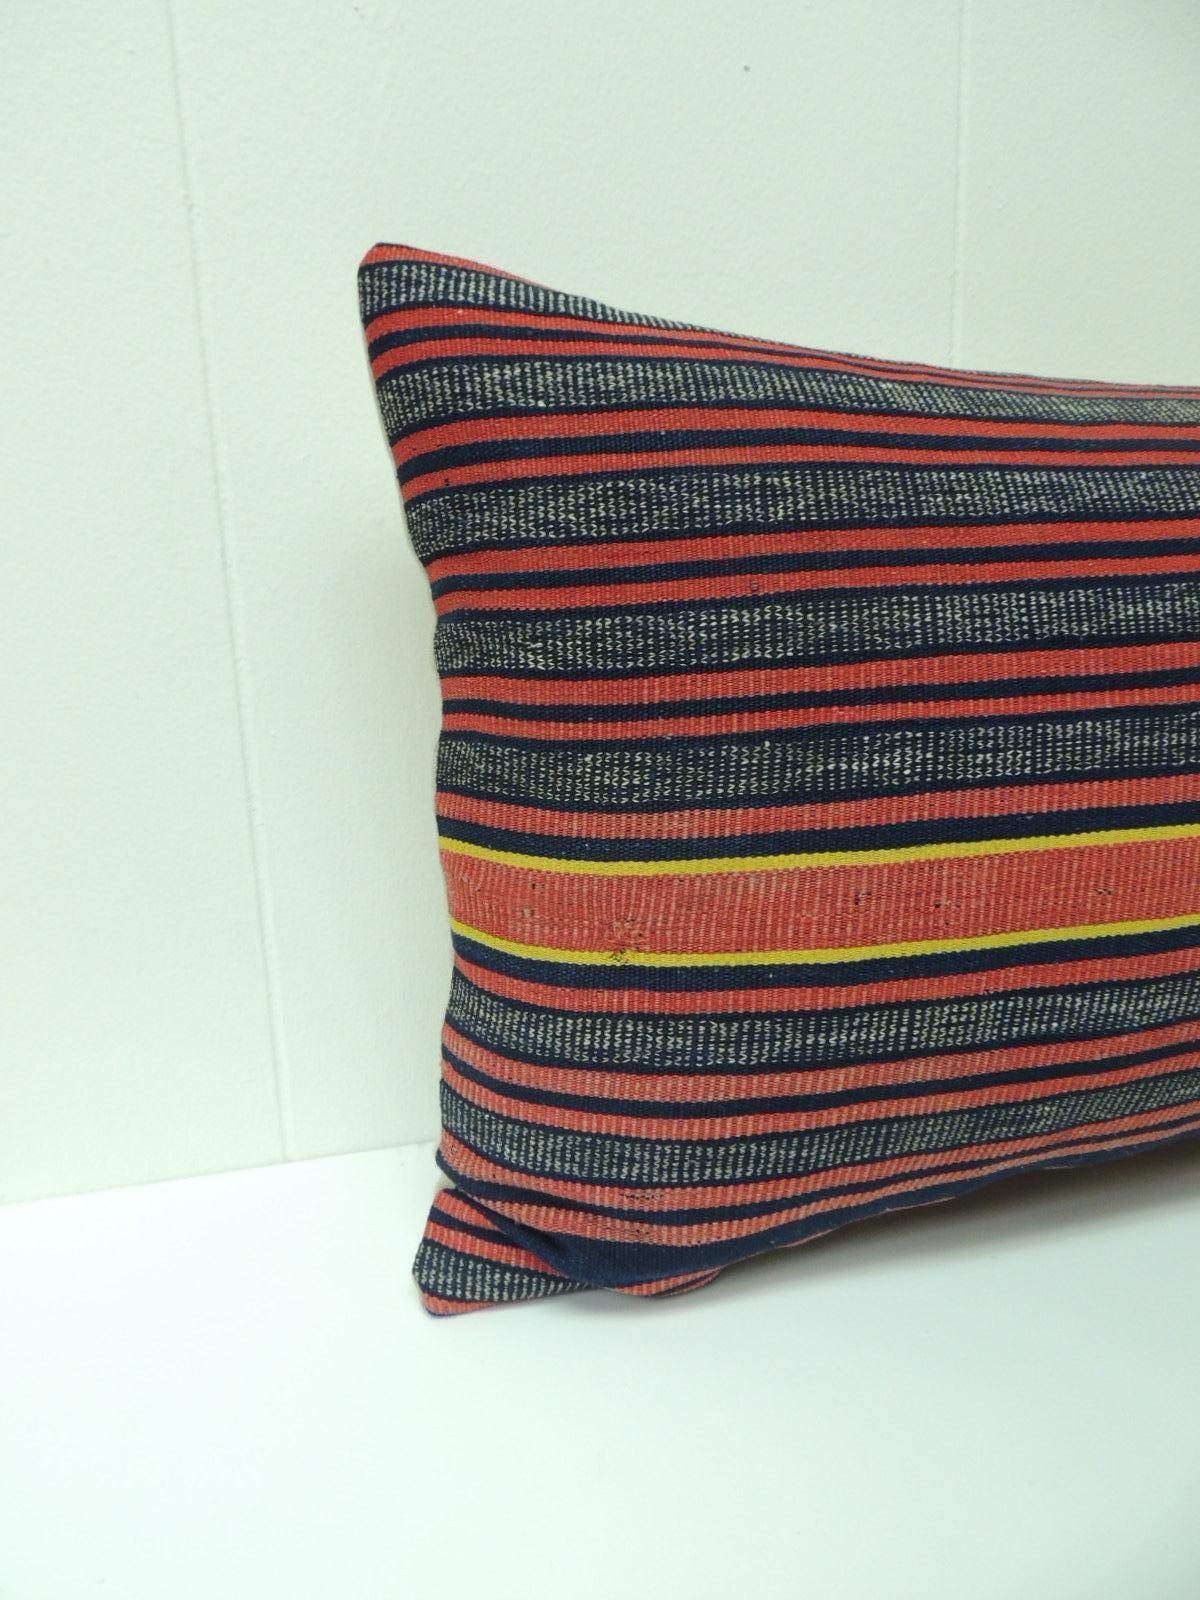 Blue and red stripe bolster accent pillow with yellow stripes in the centre, textured textile and natural linen backing. Throw vintage pillow handcrafted and designed in the USA. Closure by stitch (no zipper) with a custom made pillow insert.
Ideal